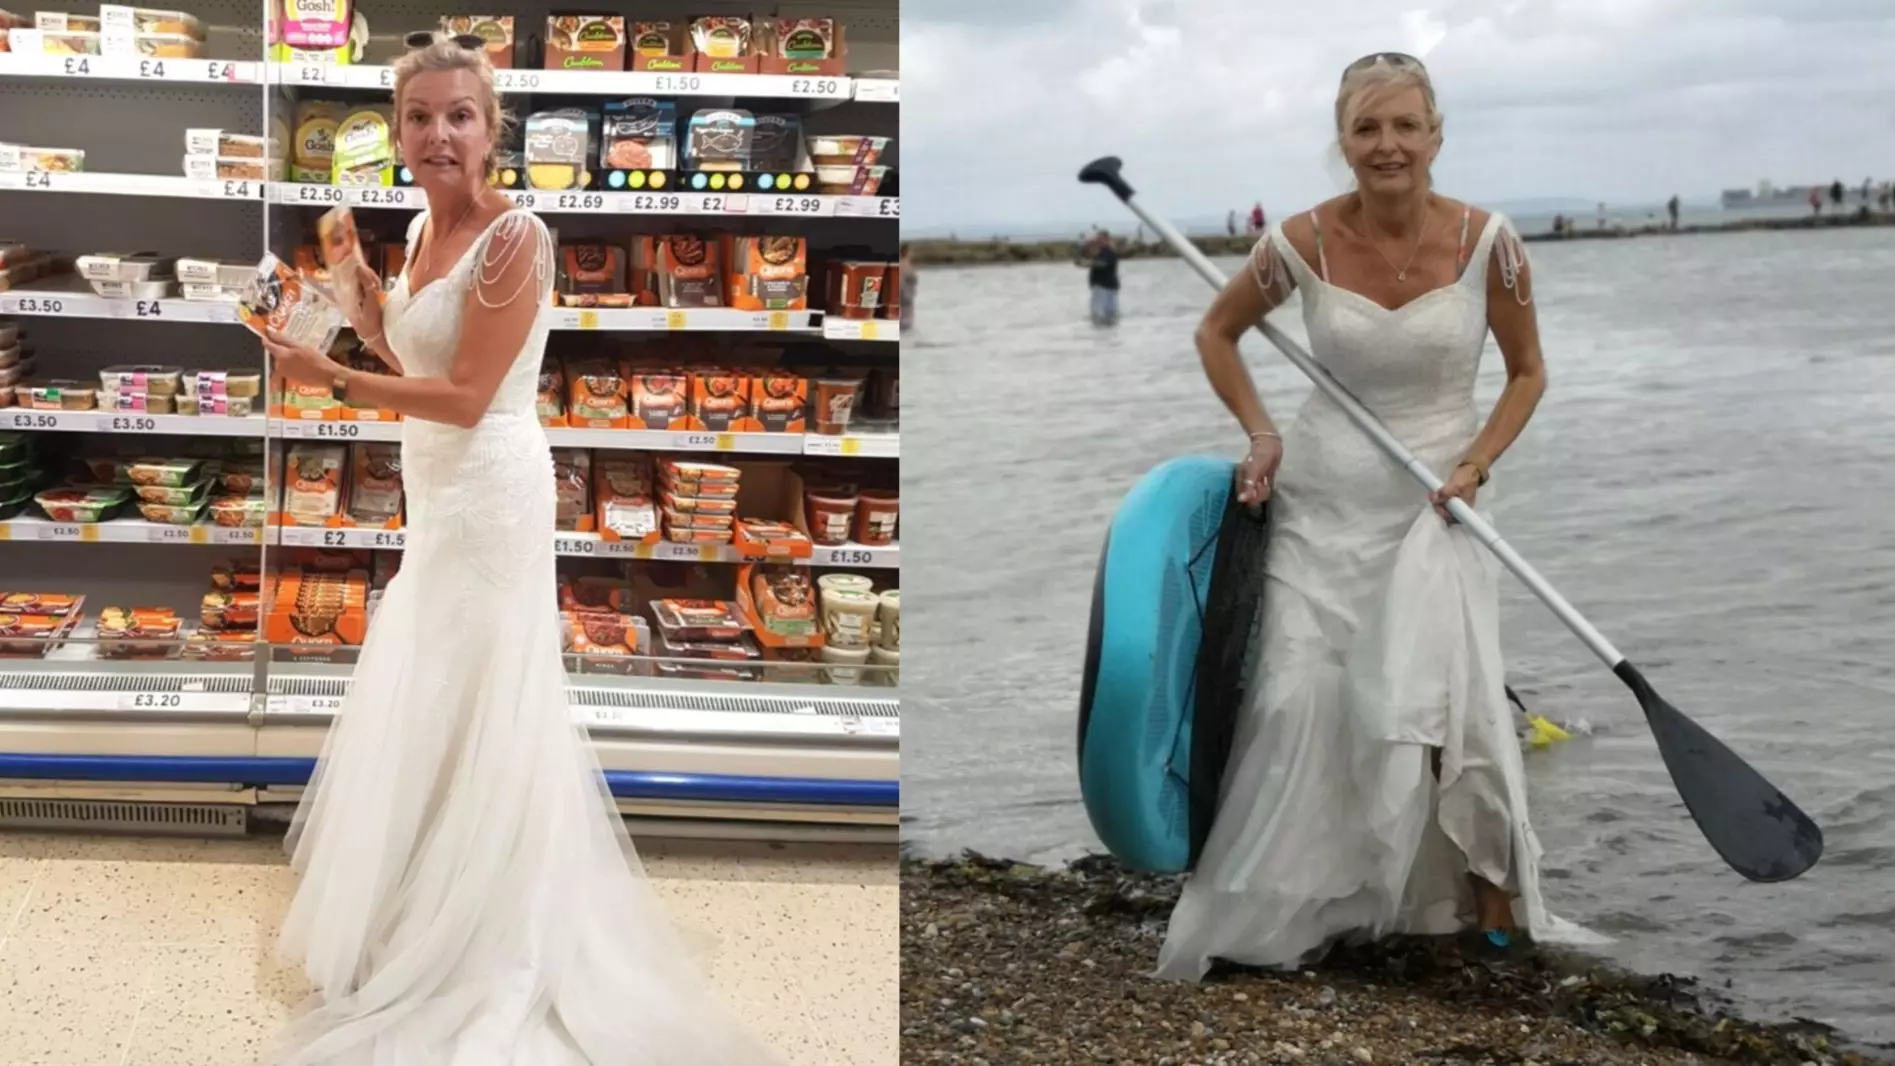 This Bride Is Wearing Her Wedding Dress To Do Her Daily Chores Because She Wants To 'Get Her Money's Worth'